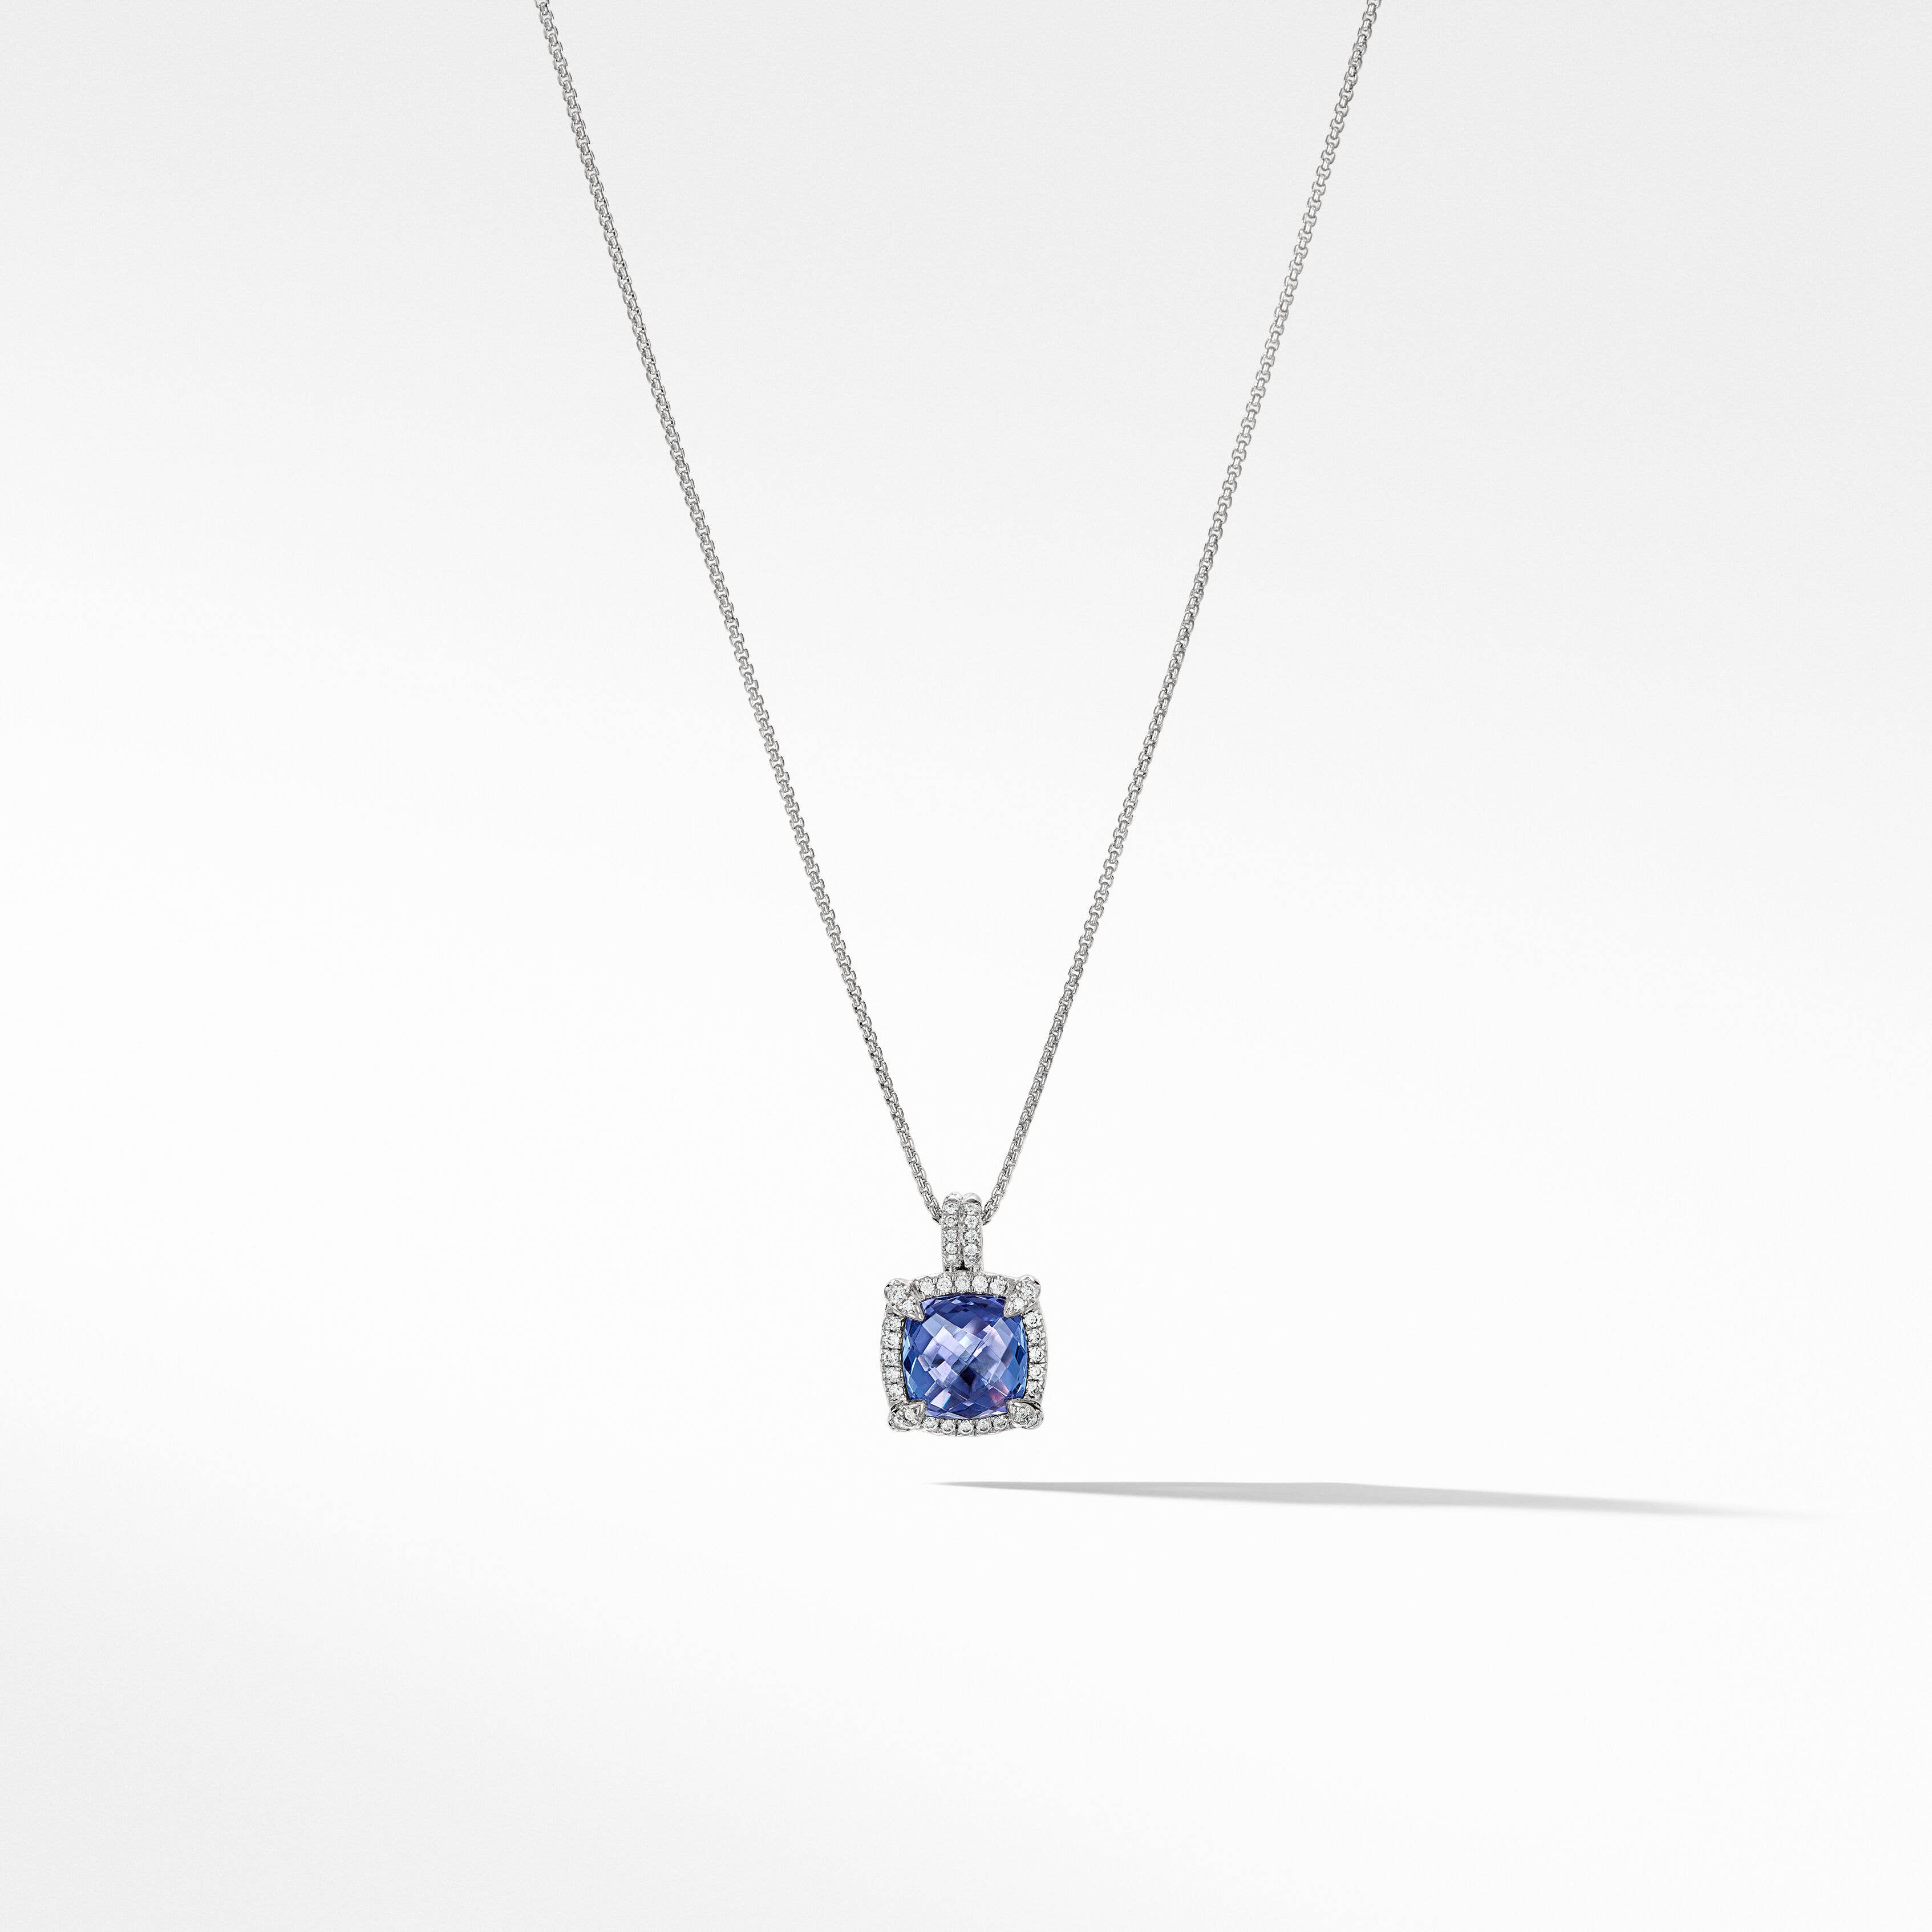 Chatelaine® Pavé Bezel Pendant Necklace in 18K White Gold with Tanzanite and Diamonds